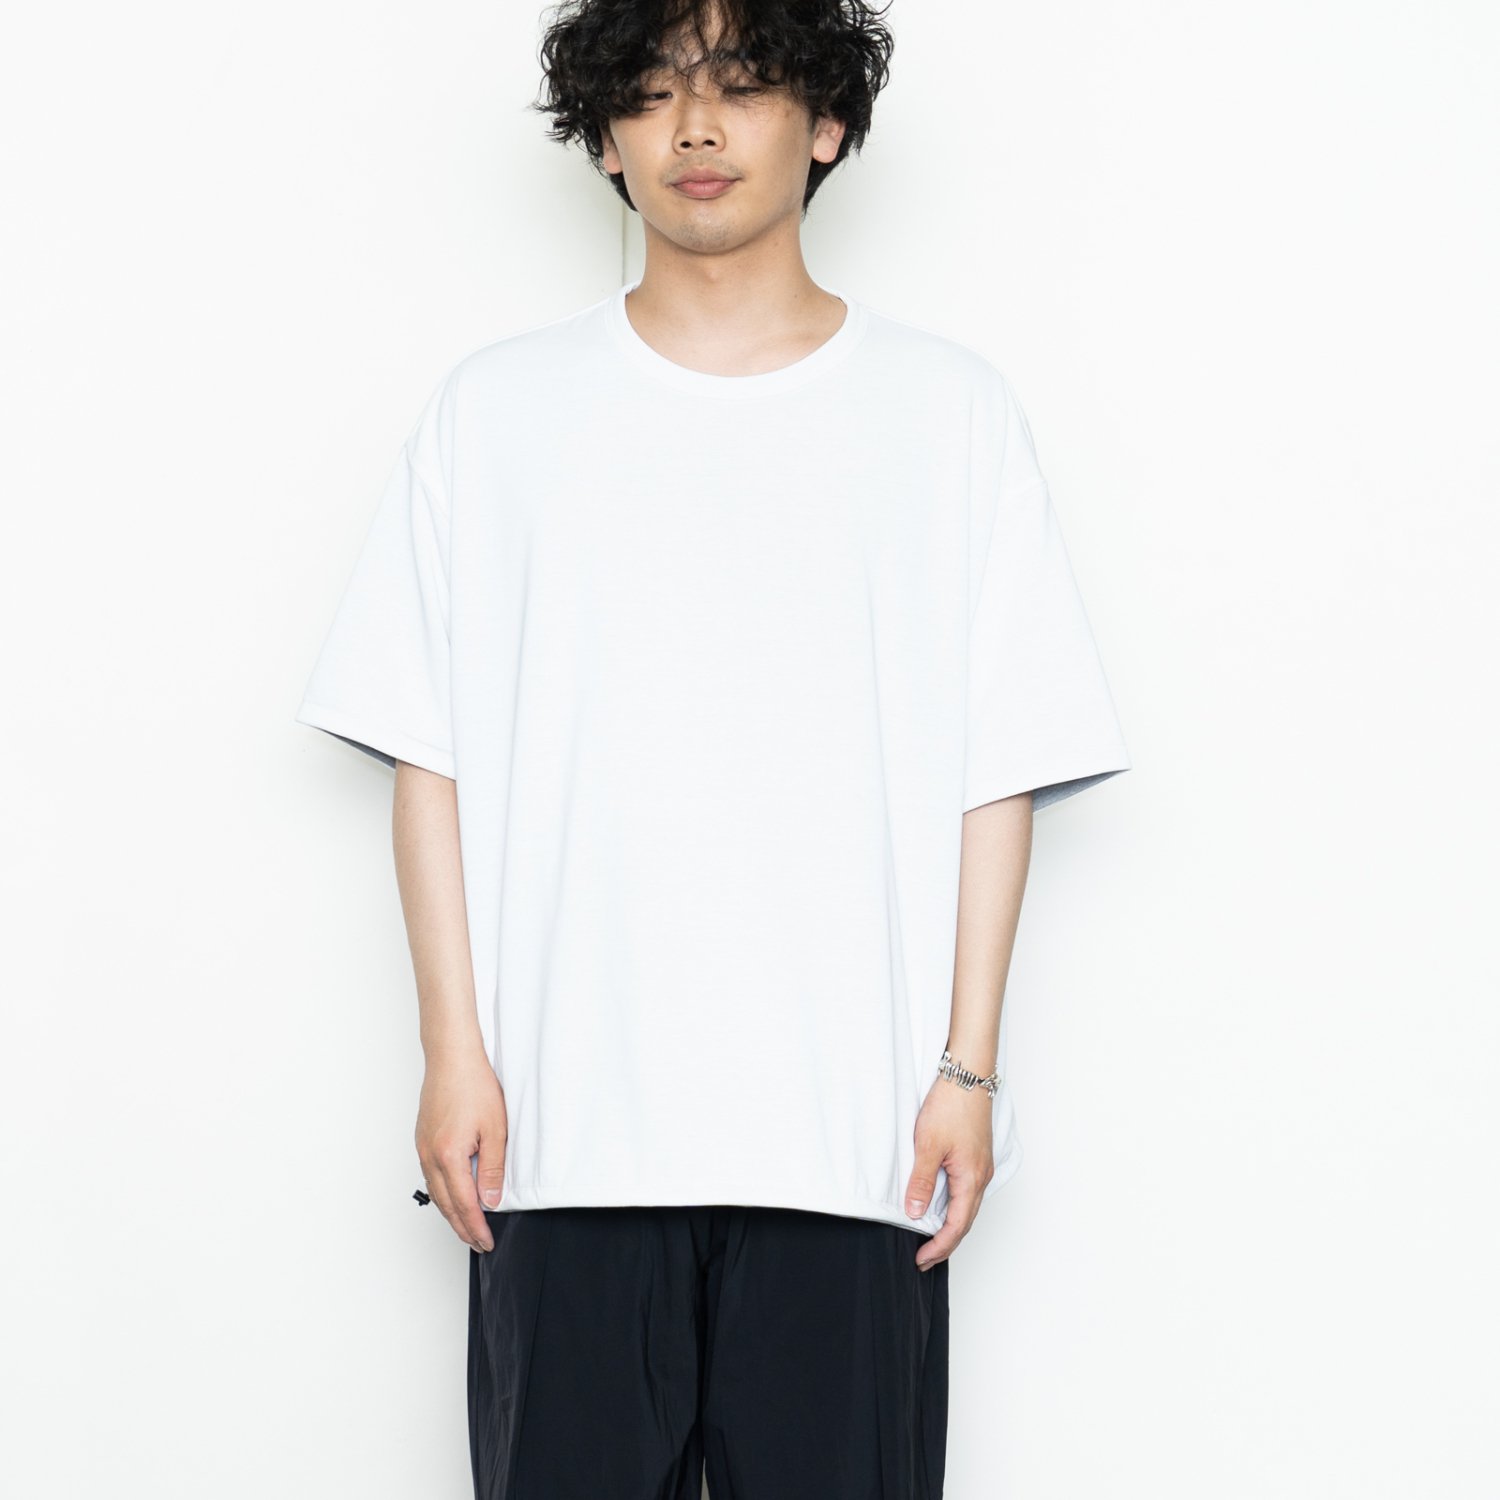 UNTRACE * BASIC REVERSIBLE TEE SS * White/Gray